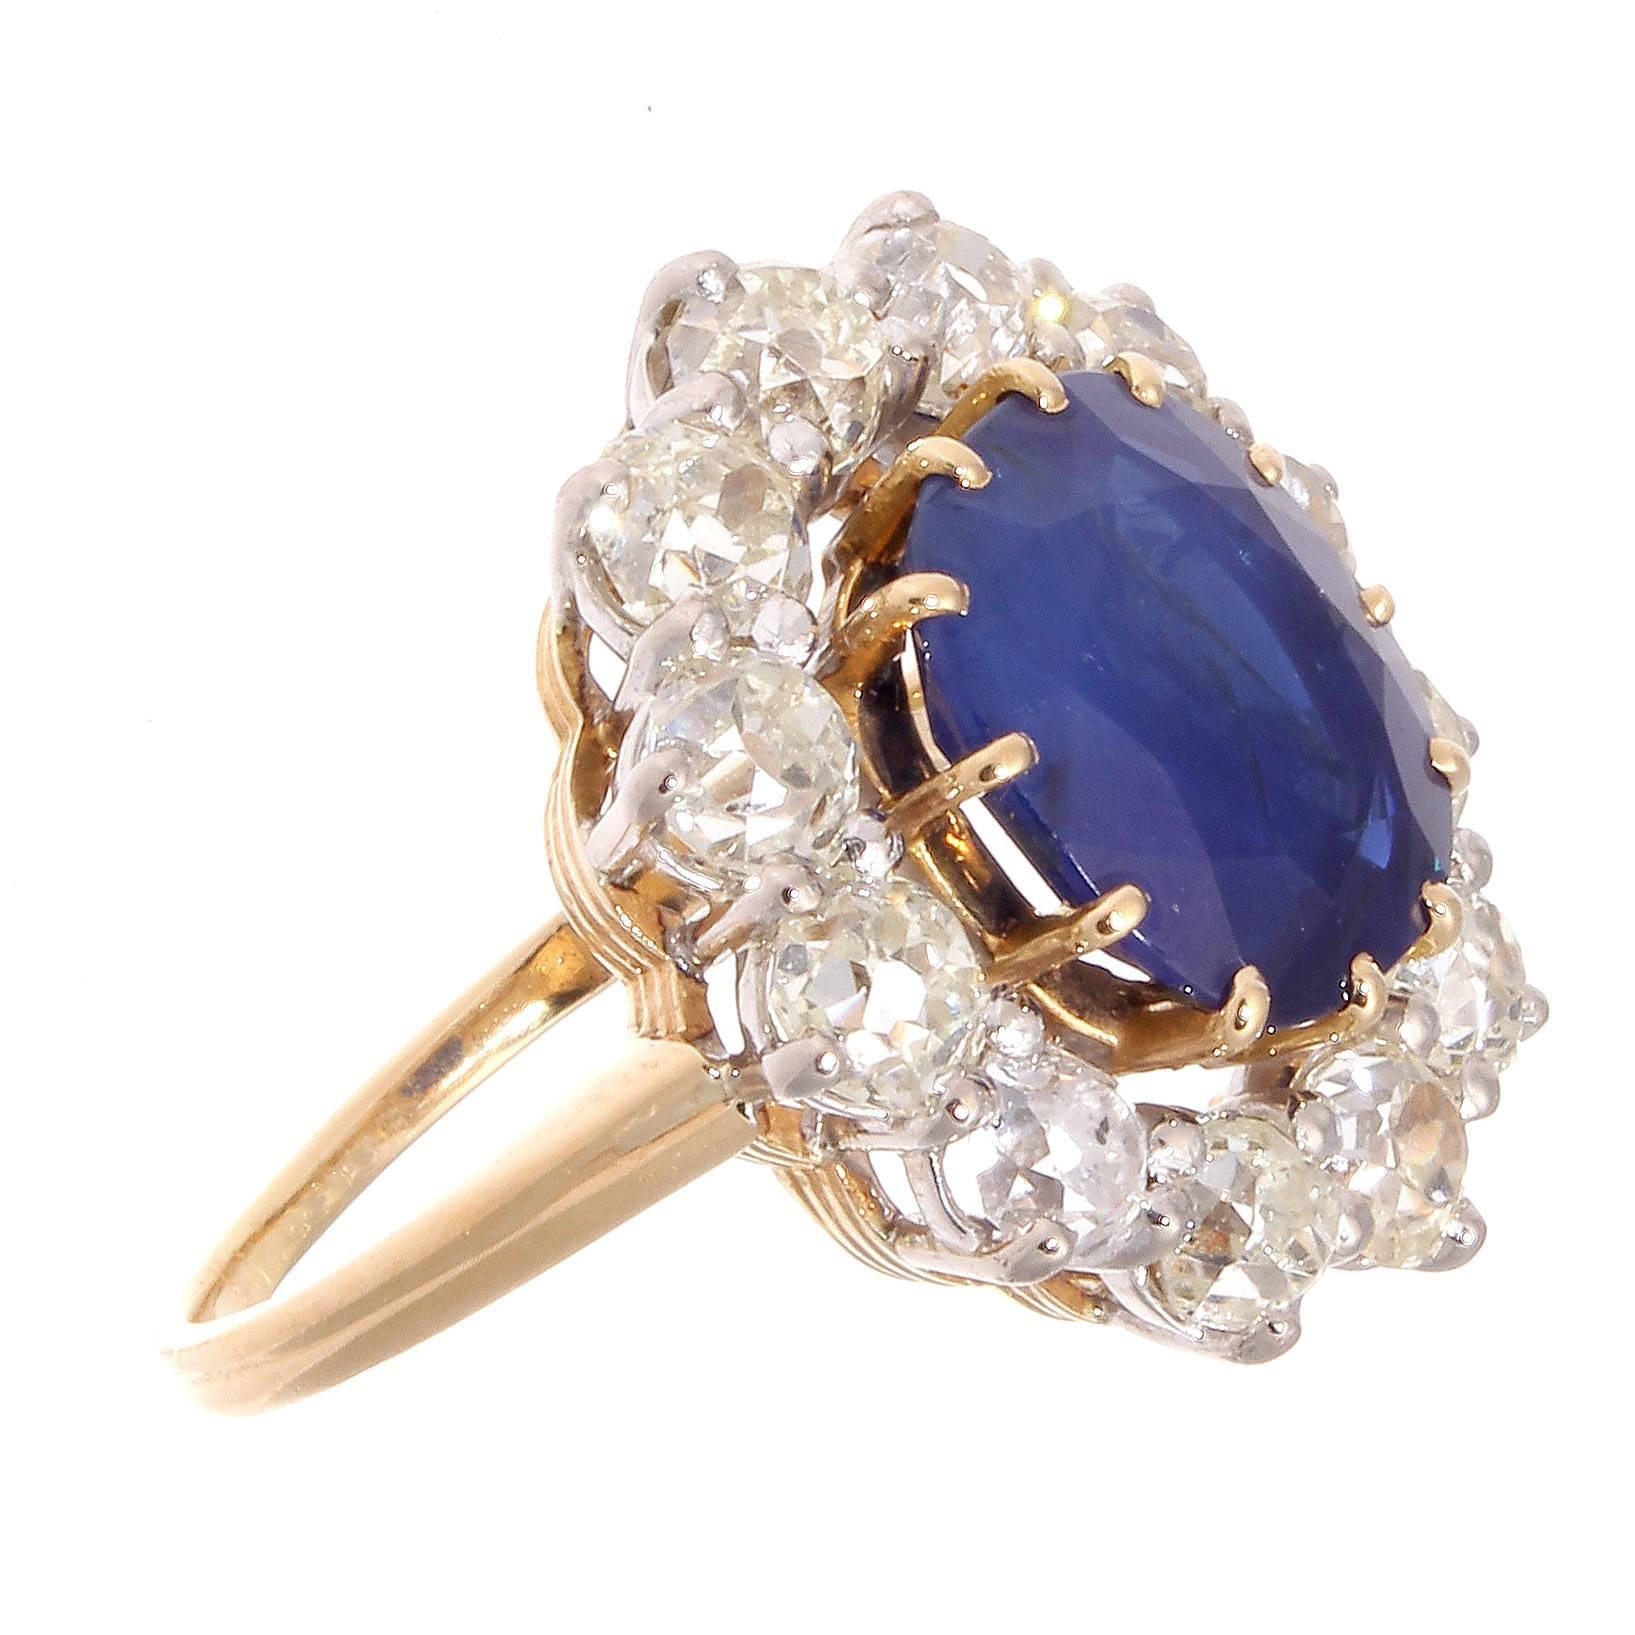 A lovely combination of glamour and style, infusing the classic halo ring with extravagant cocktail design. Featuring an approximately 5 carat lovely royal blue sapphire both deep and vivid by definition and is certified by GIA as Cambodian origin